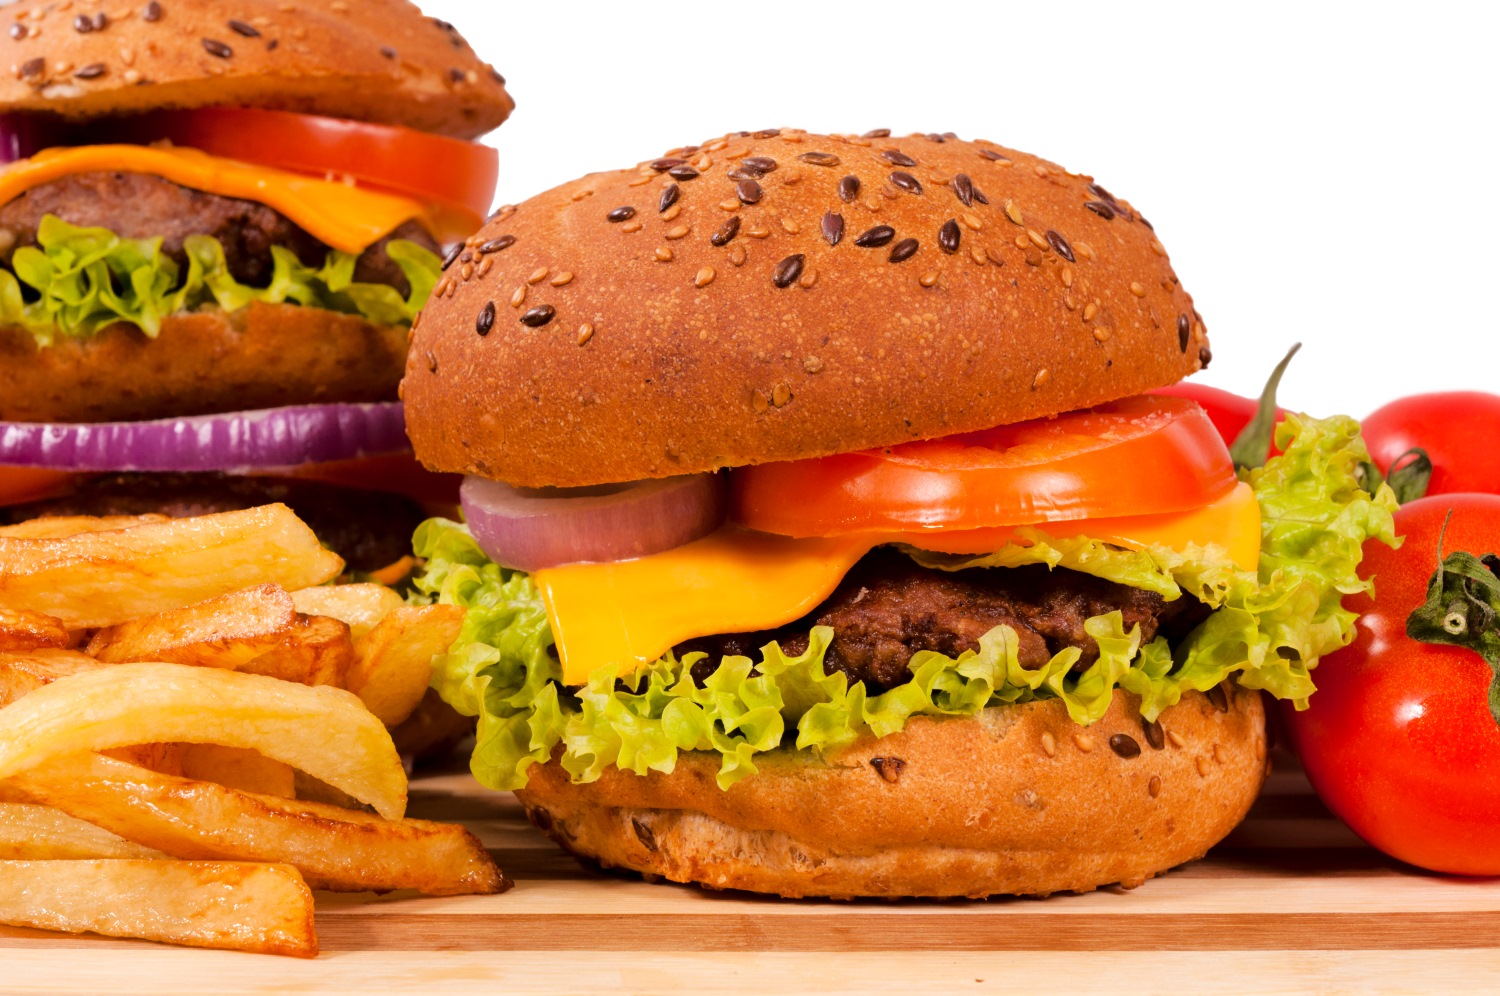 How Junk Food Marketing Leads to Unhealthy Diets